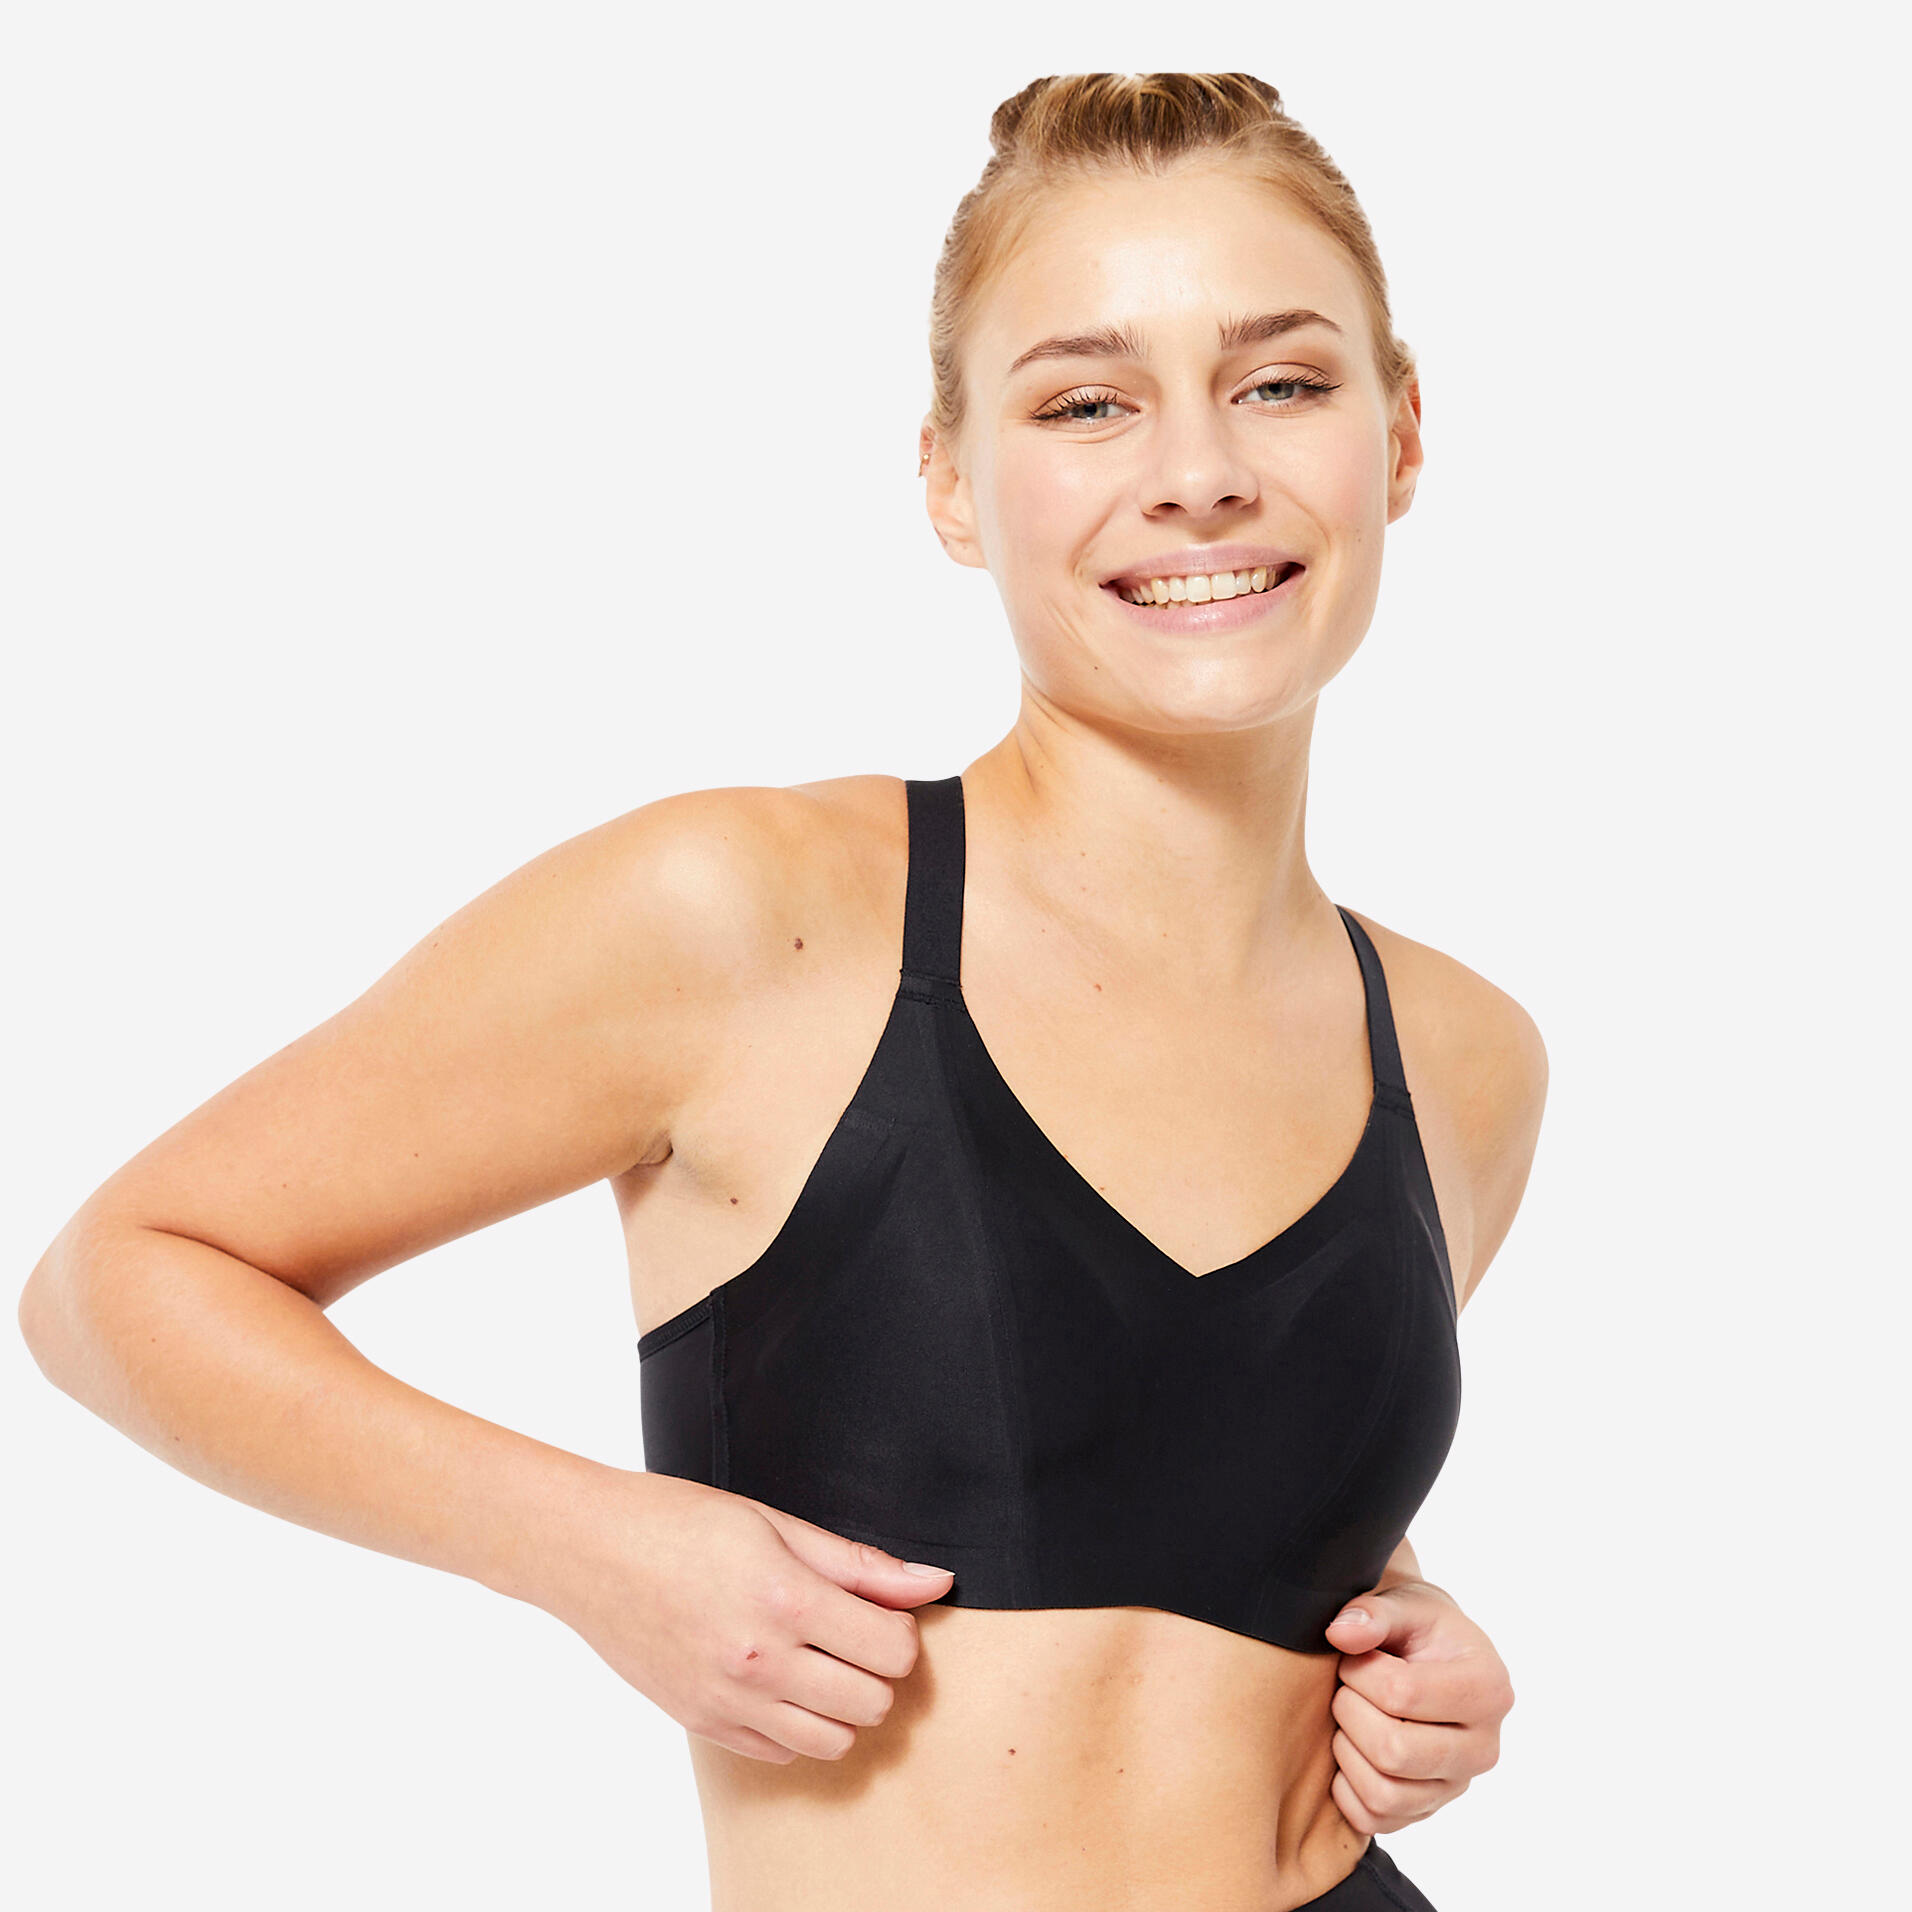 KALENJI Women's invisible sports bra with high-support cups - Black